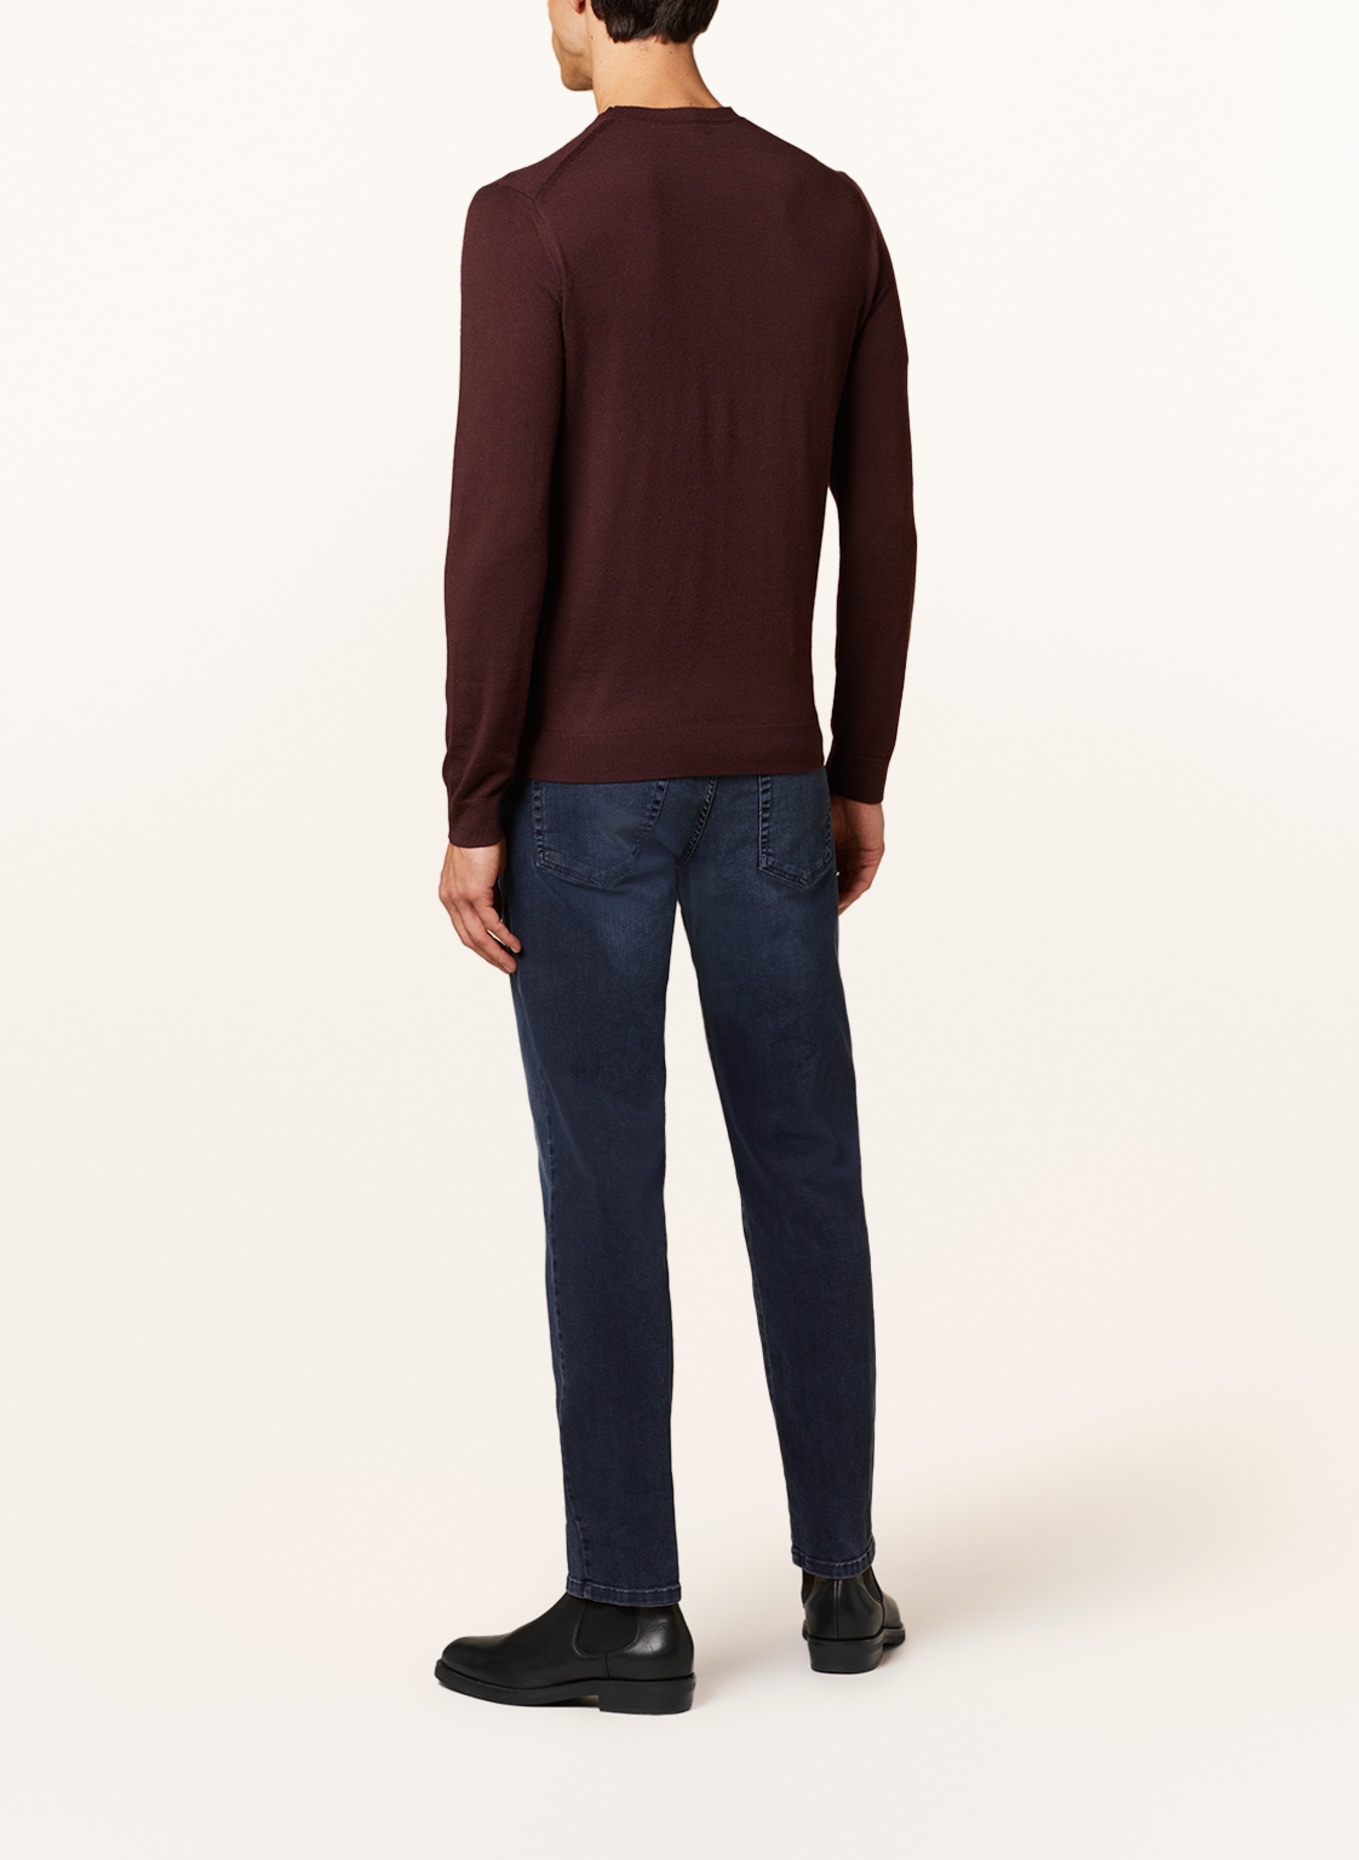 REISS Sweater WESSEX made of merino wool, Color: DARK RED (Image 3)